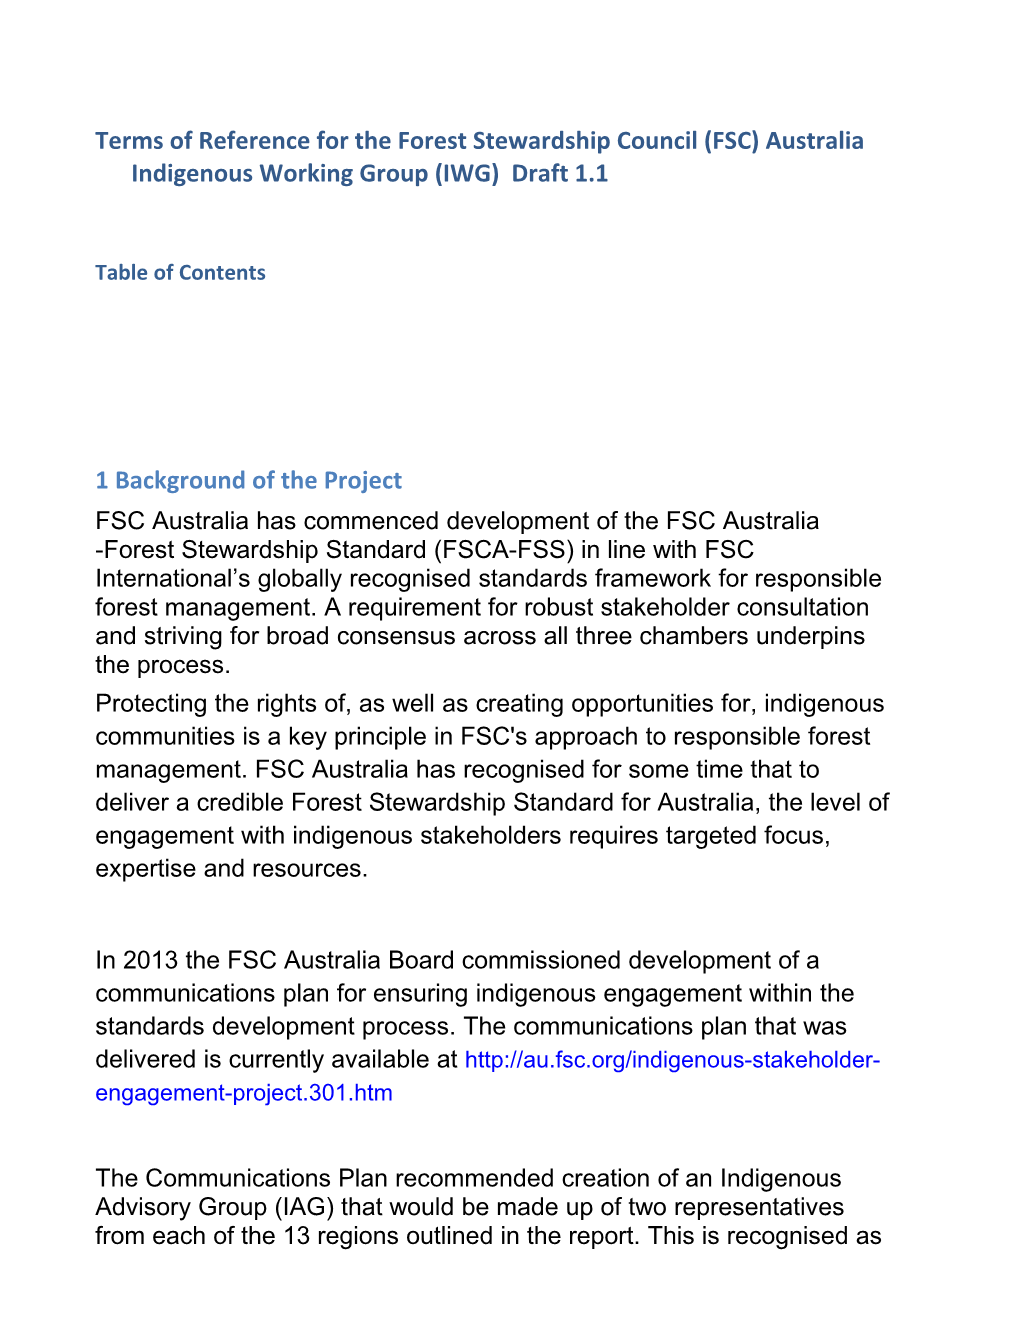 Terms of Reference for the Forest Stewardship Council (FSC) Australia Indigenous Working